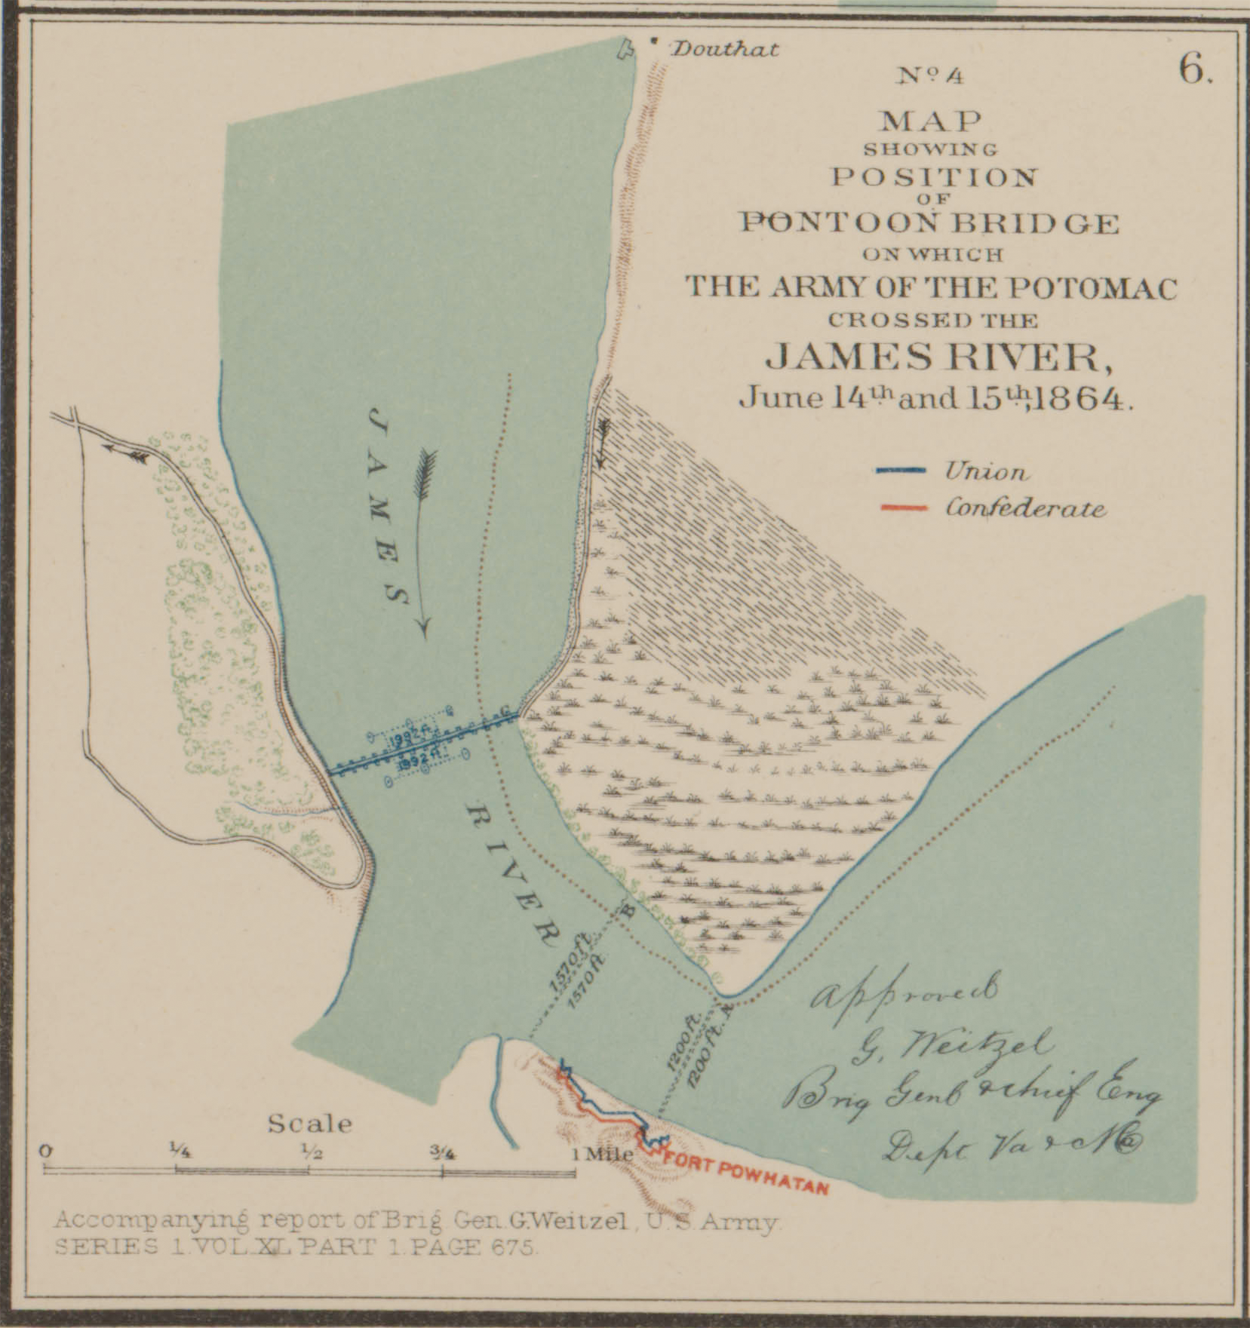 No. 4 Map Showing Position of Pontoon Bridge on Which the Army of the Potomac Crossed the James River June 14th and 15th 1864 (OR Atlas 68:6)